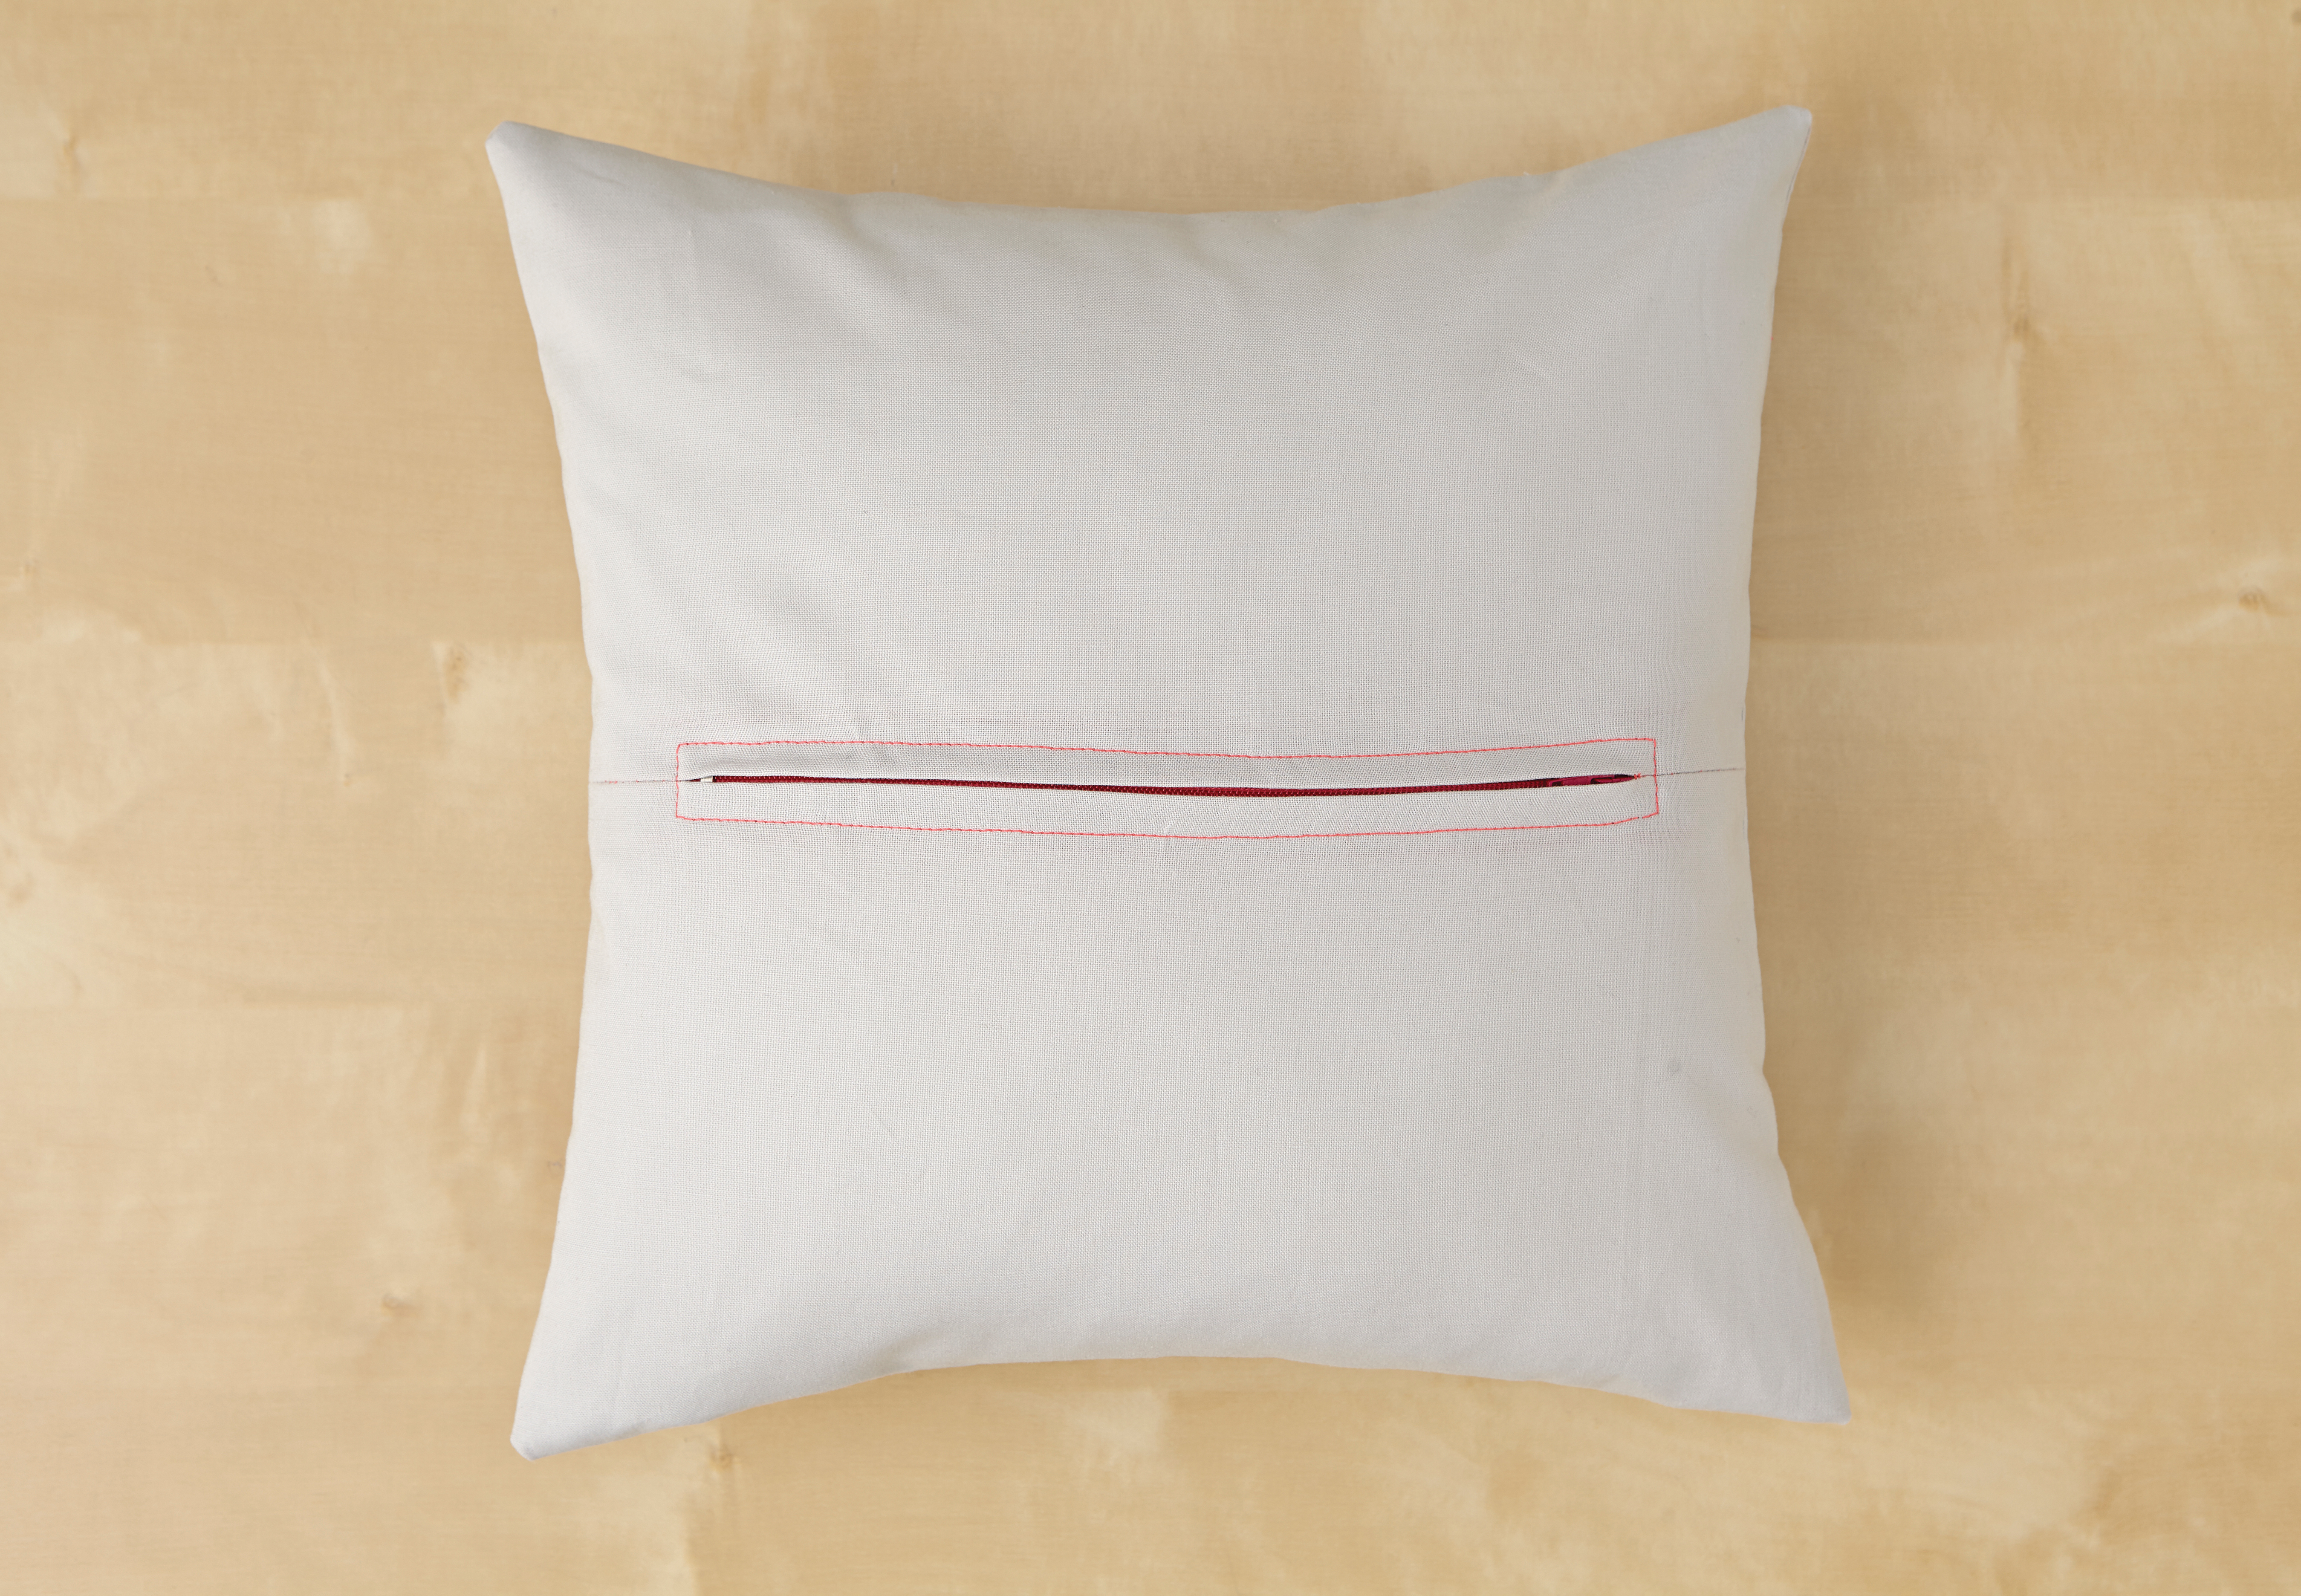 How to make a cushion cover with zip